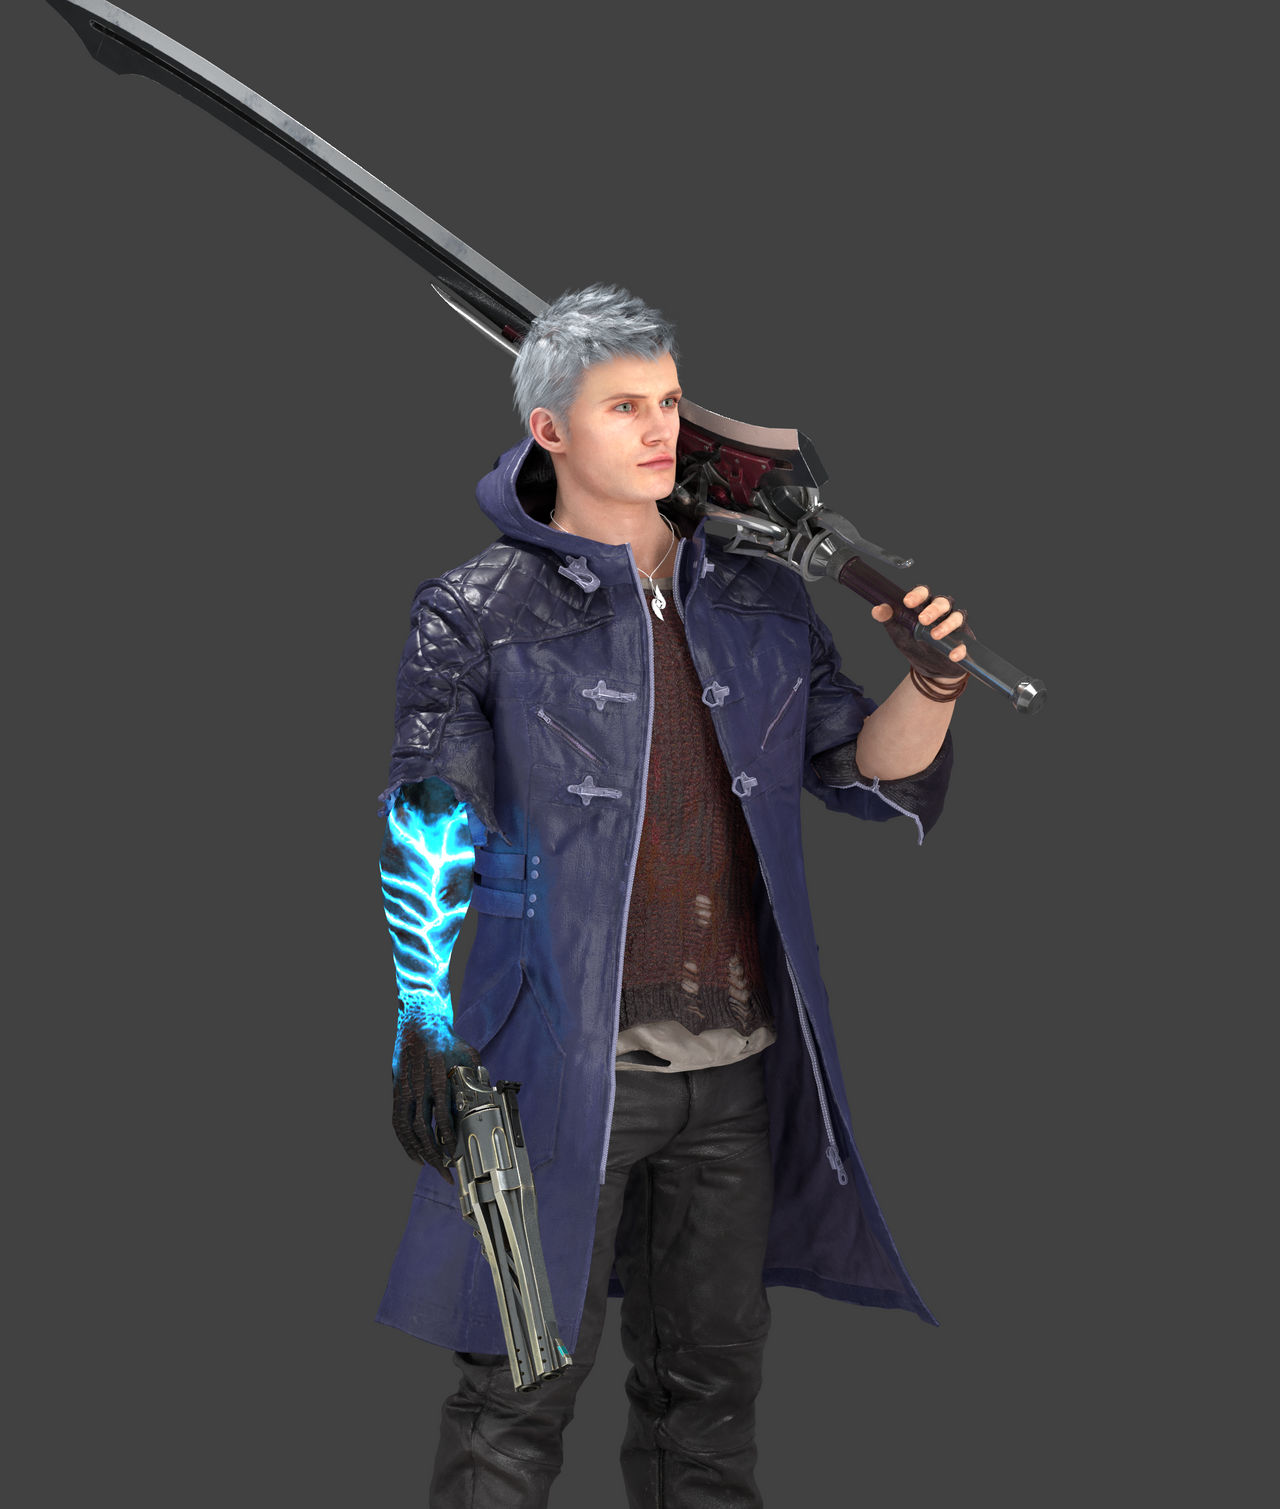 Devil May Cry 5 - Nero Render by Crussong on DeviantArt